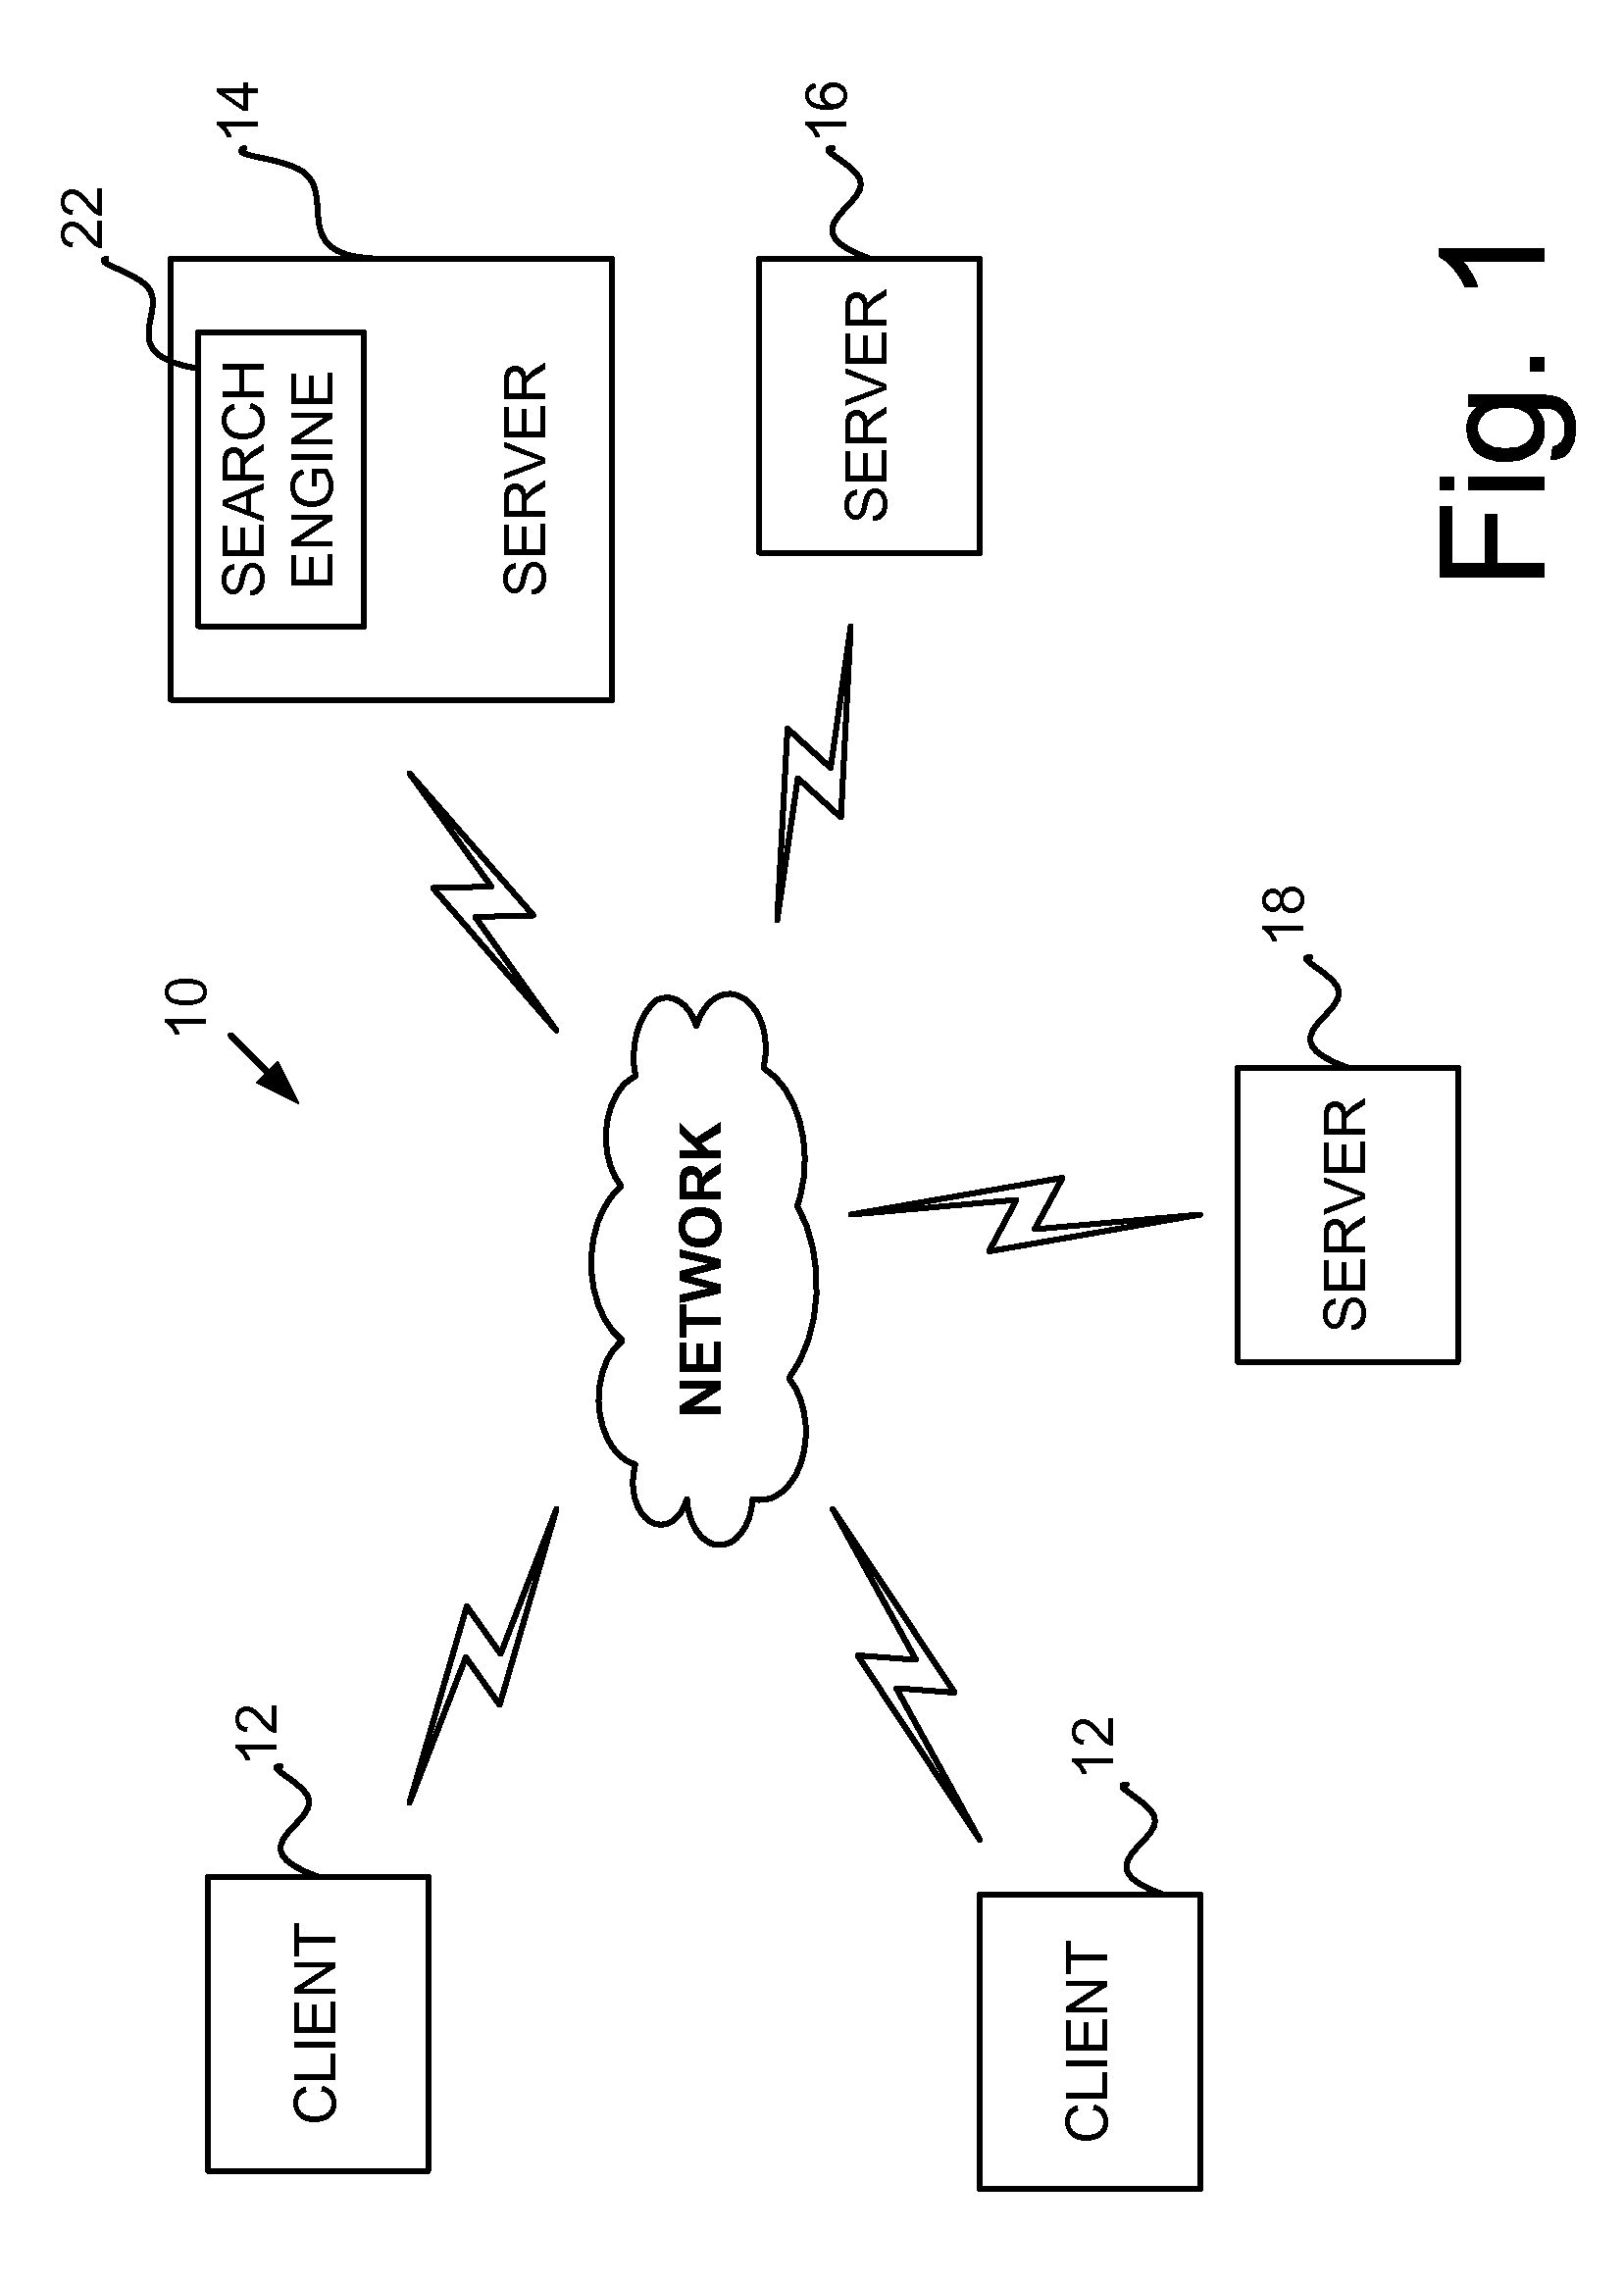 Documents discrimination system and method thereof